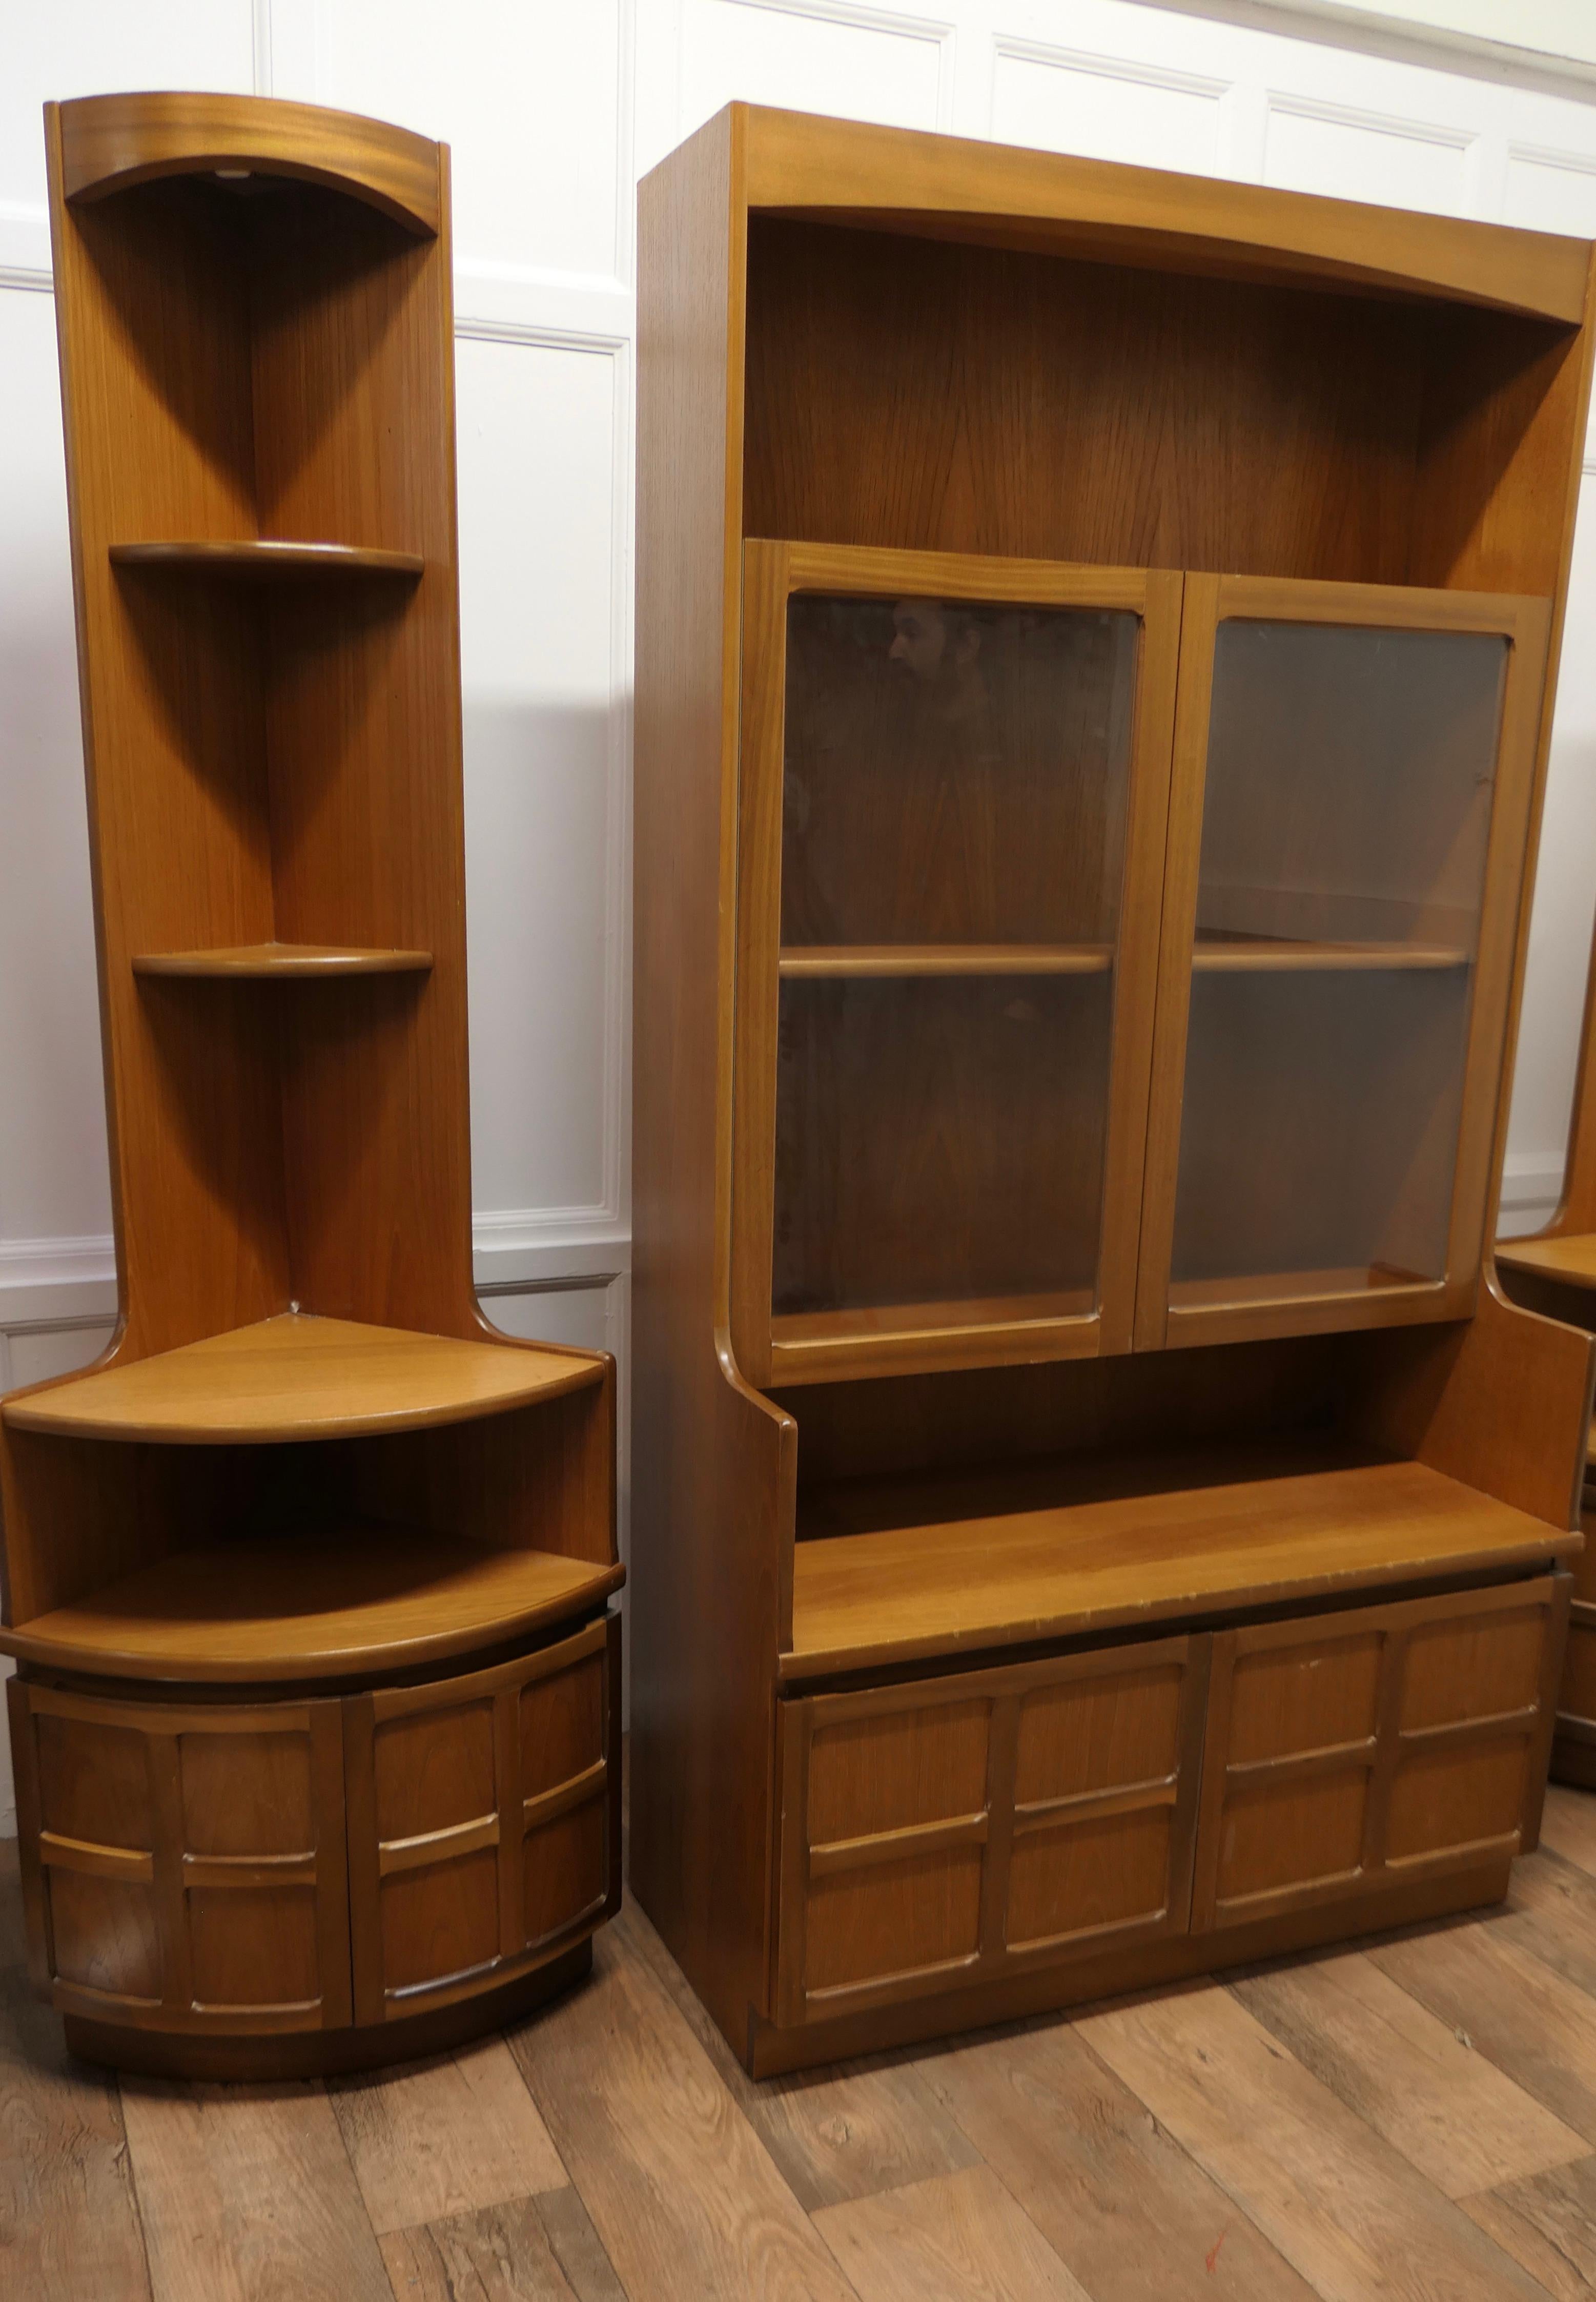 Teak Wall Unit by Nathan Furniture, 2 Corner & 1 Main Unit In Good Condition For Sale In Chillerton, Isle of Wight